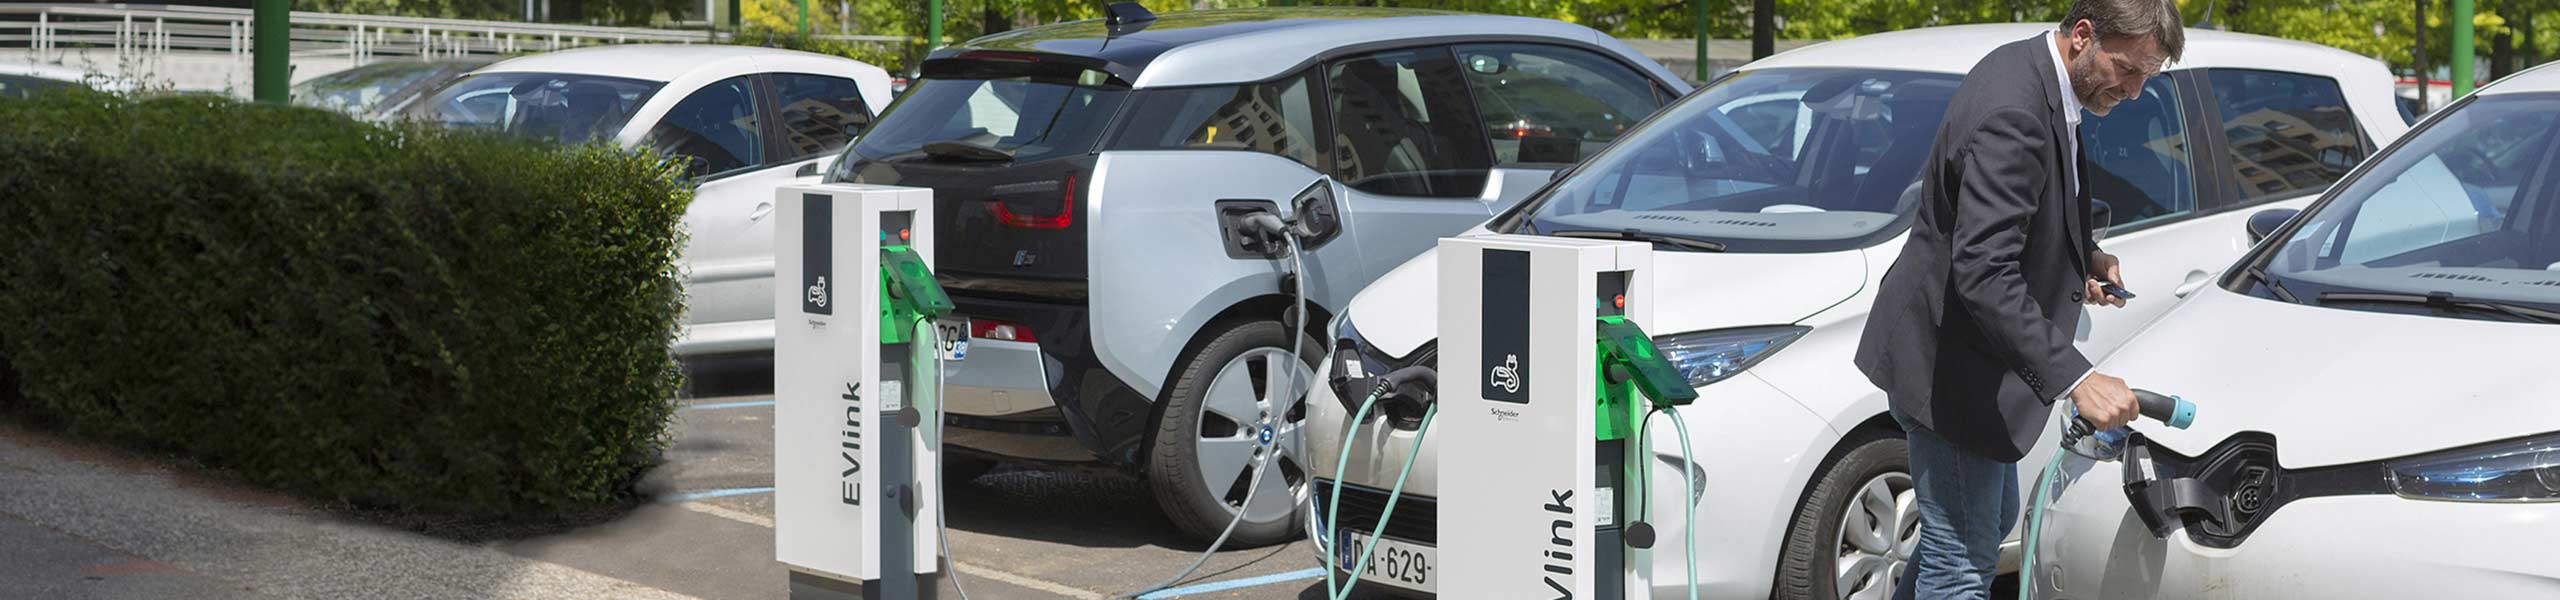 EVlink Charging stations for Electric Vehicles Schneider Electric